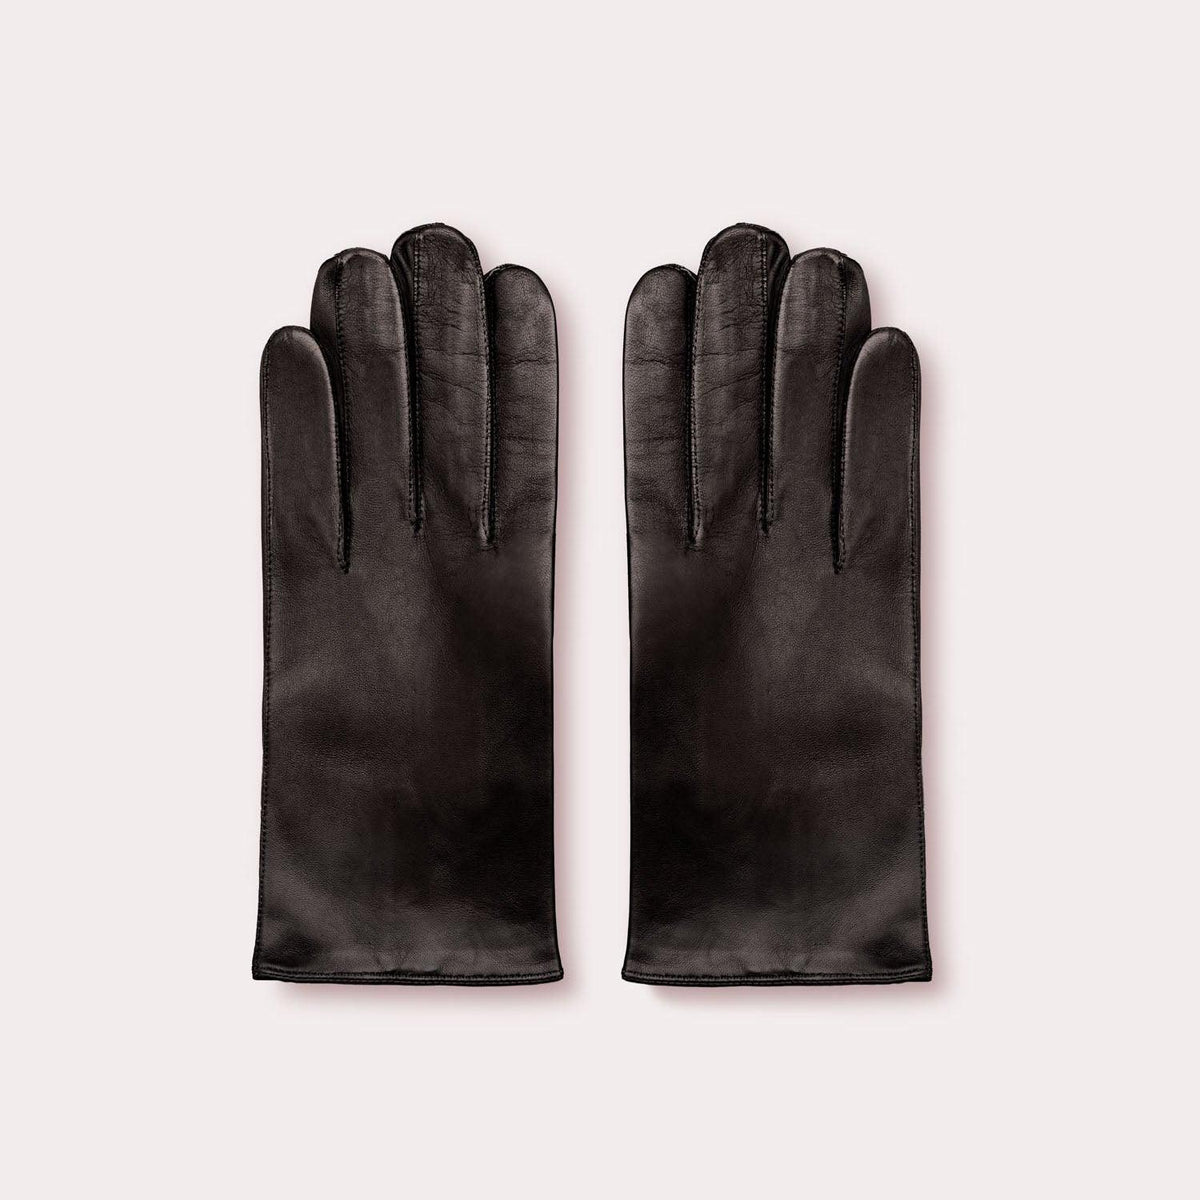 Men's Grant Glove with Cashmere Lining, black leather gloves.